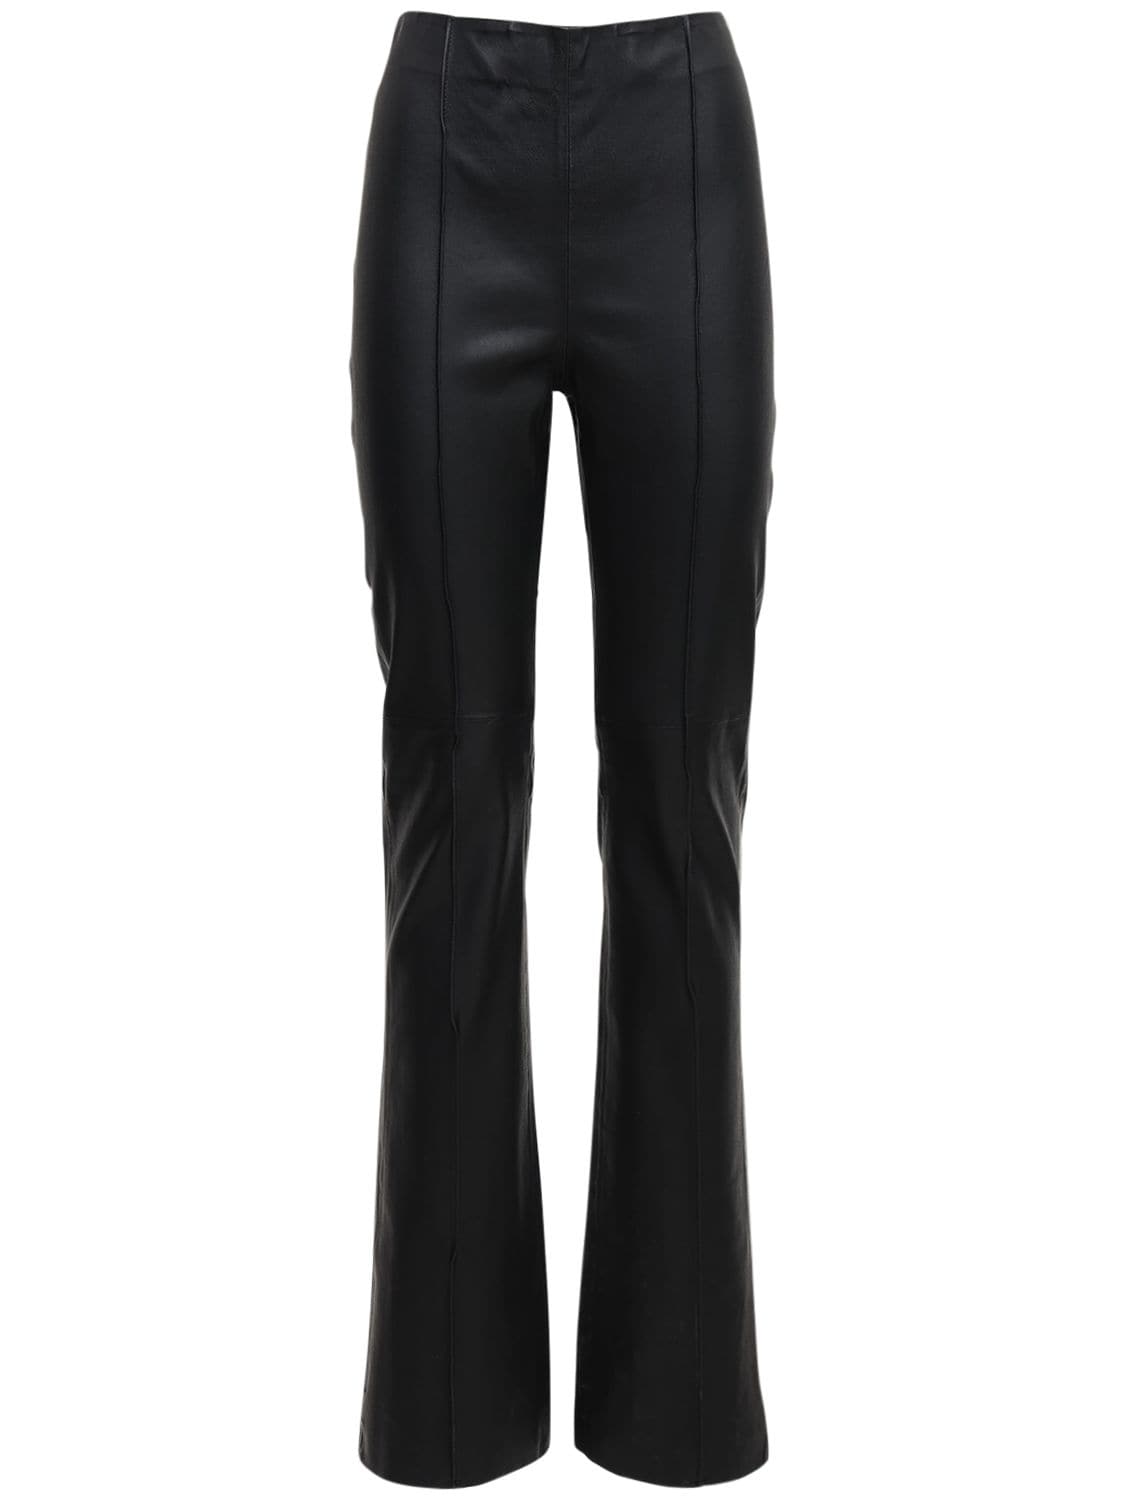 Remain Floral Bootcut Leather Pants In Black | ModeSens